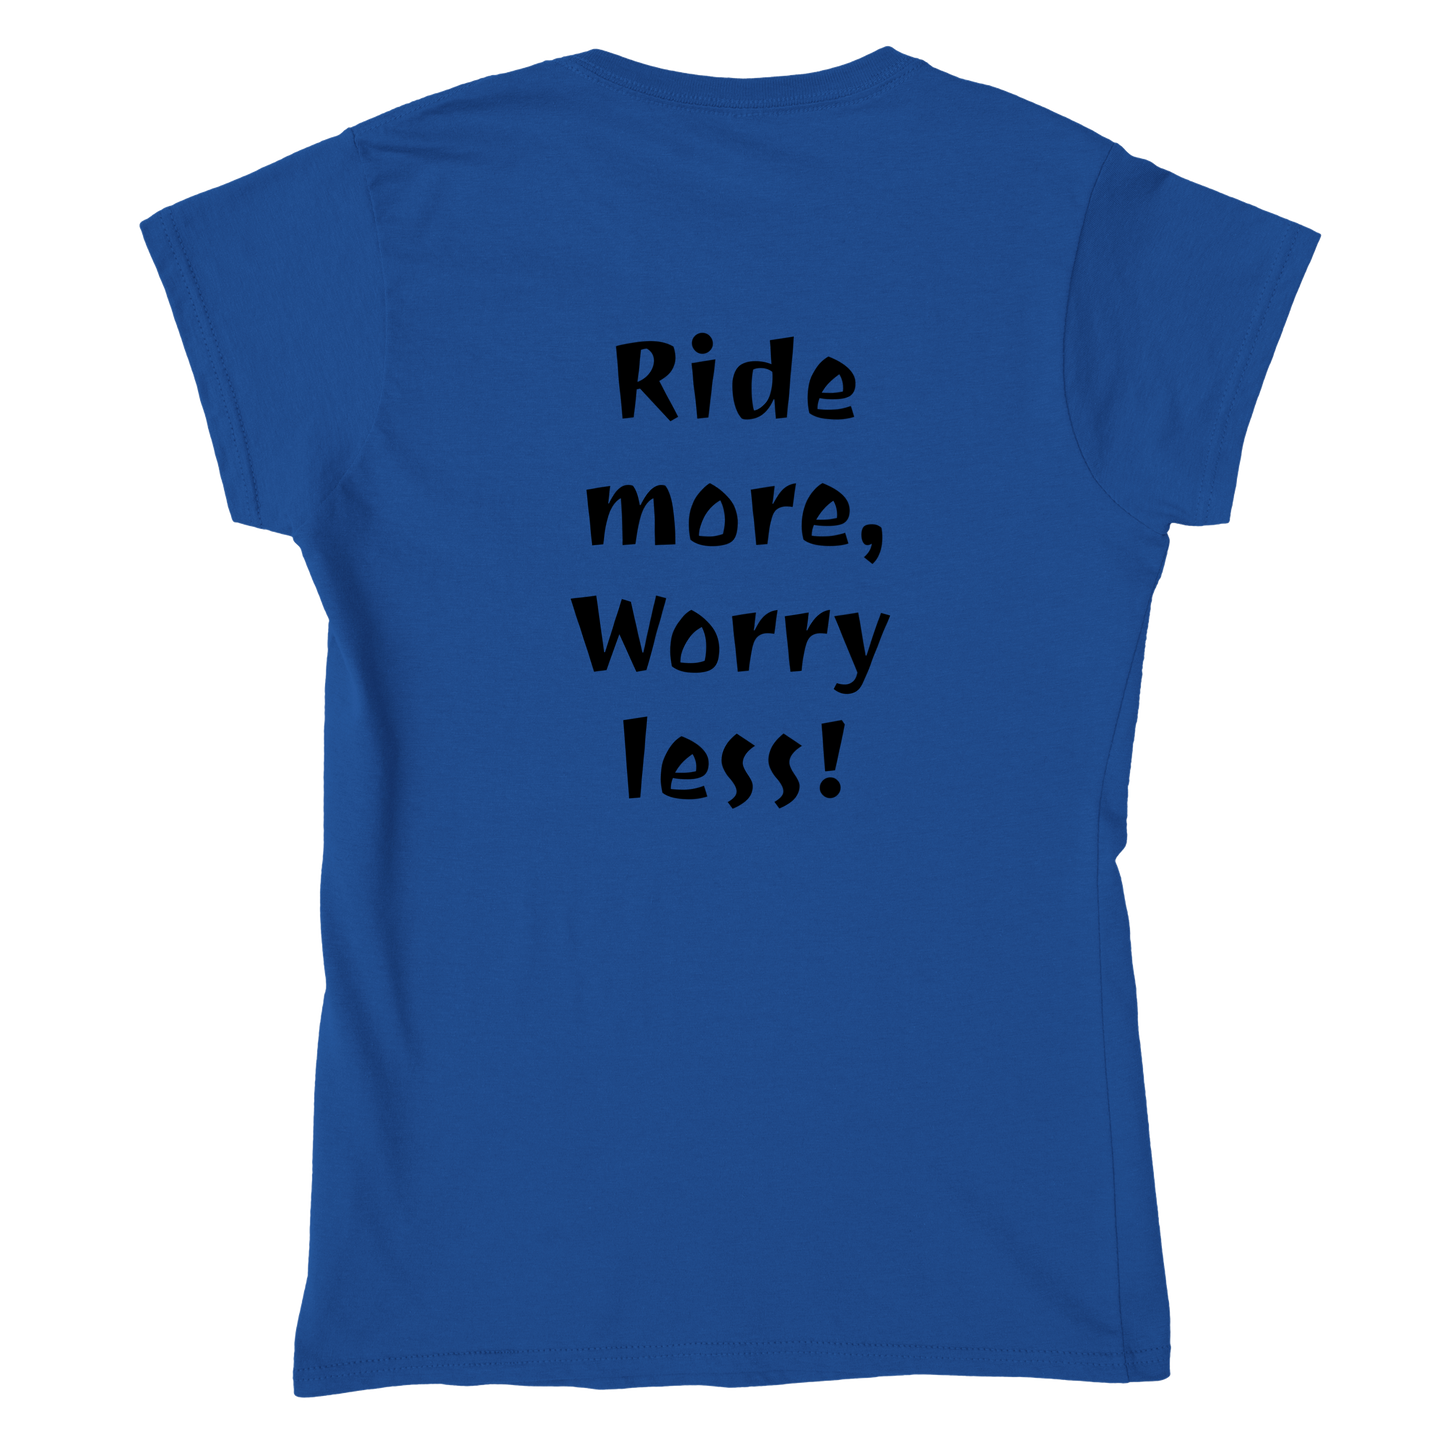 Hand Drawn Horse || Women's Crewneck T-shirt - Design: "Going Riding"; Static Design; Personalizable Back Text